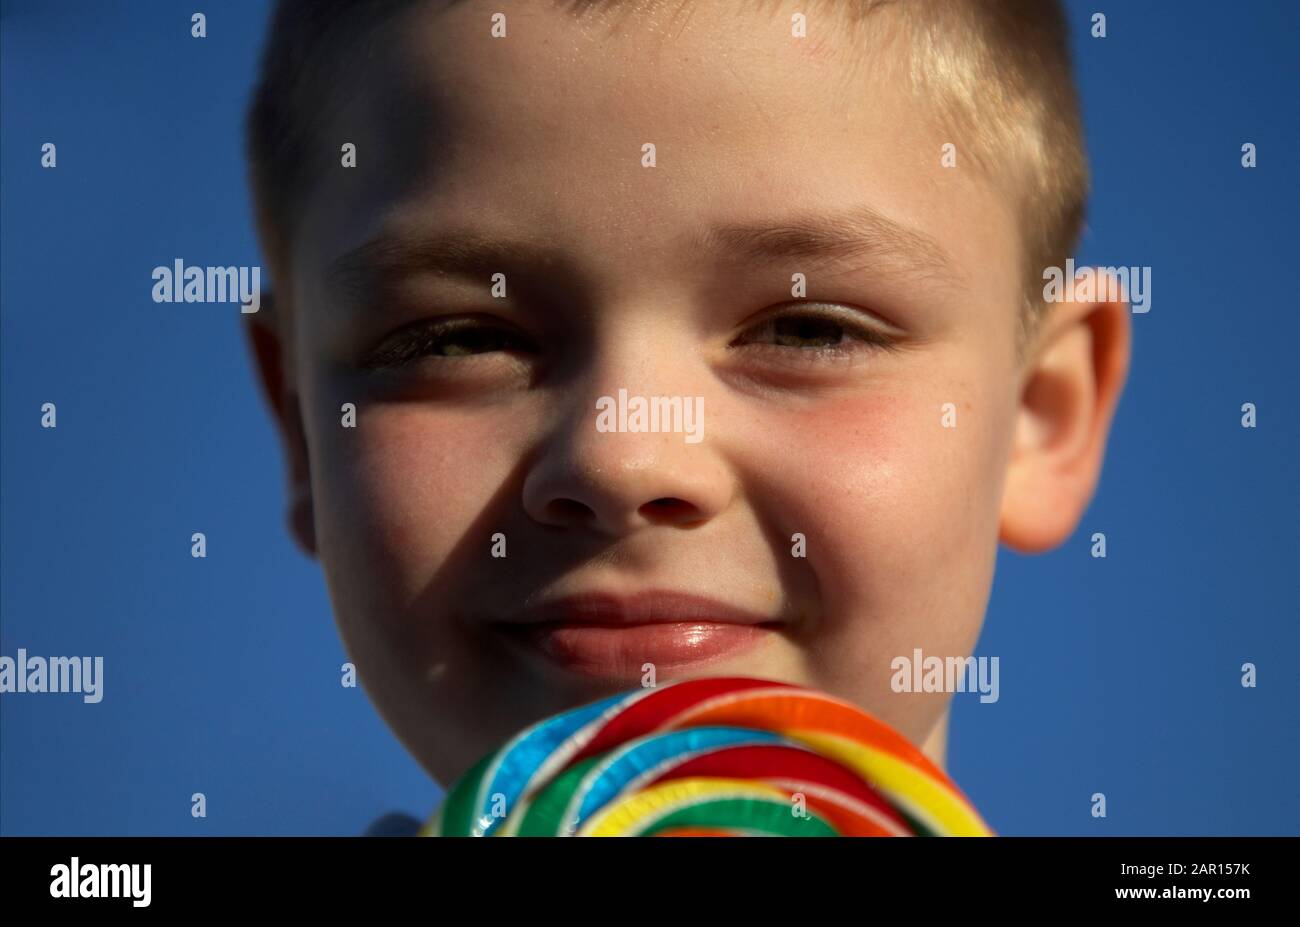 smiling 8 year old boy enjoys eating a sweet lolly Stock Photo